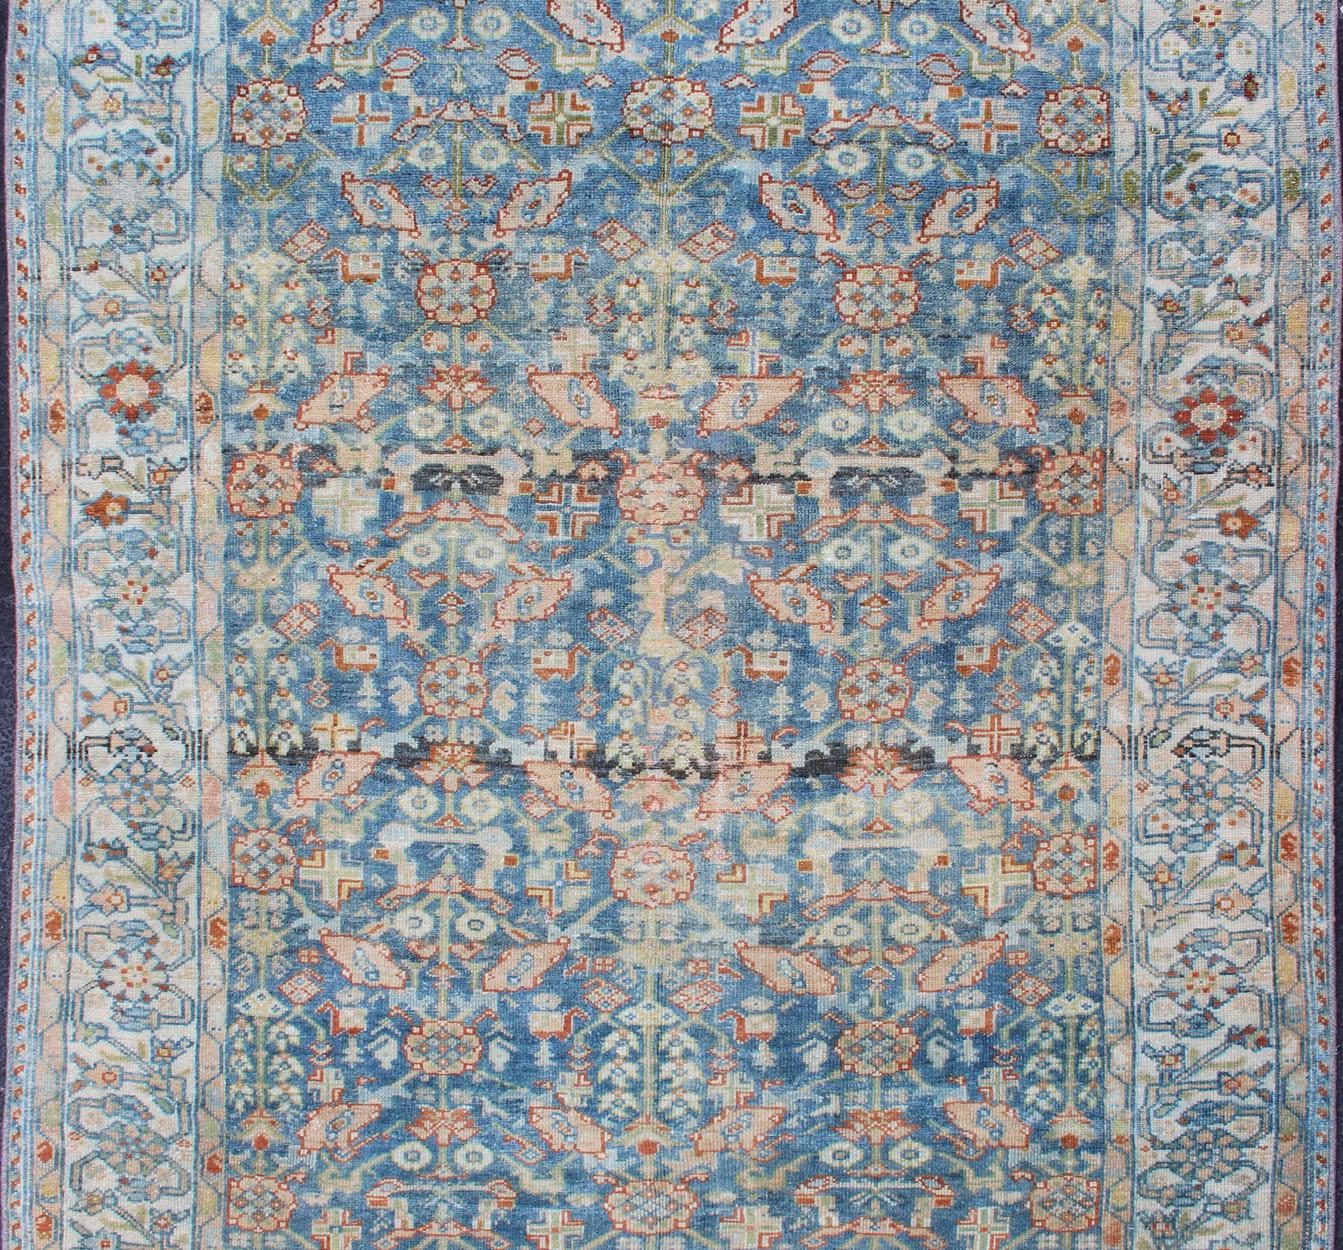 Antique Persian rug with blue field and ivory border, rug SUS-2007-465, country of origin / type: Iran / Malayer, circa 1920.

This traditional Persian Malayer carpet from the early 20th century is characterized by a central field filled with